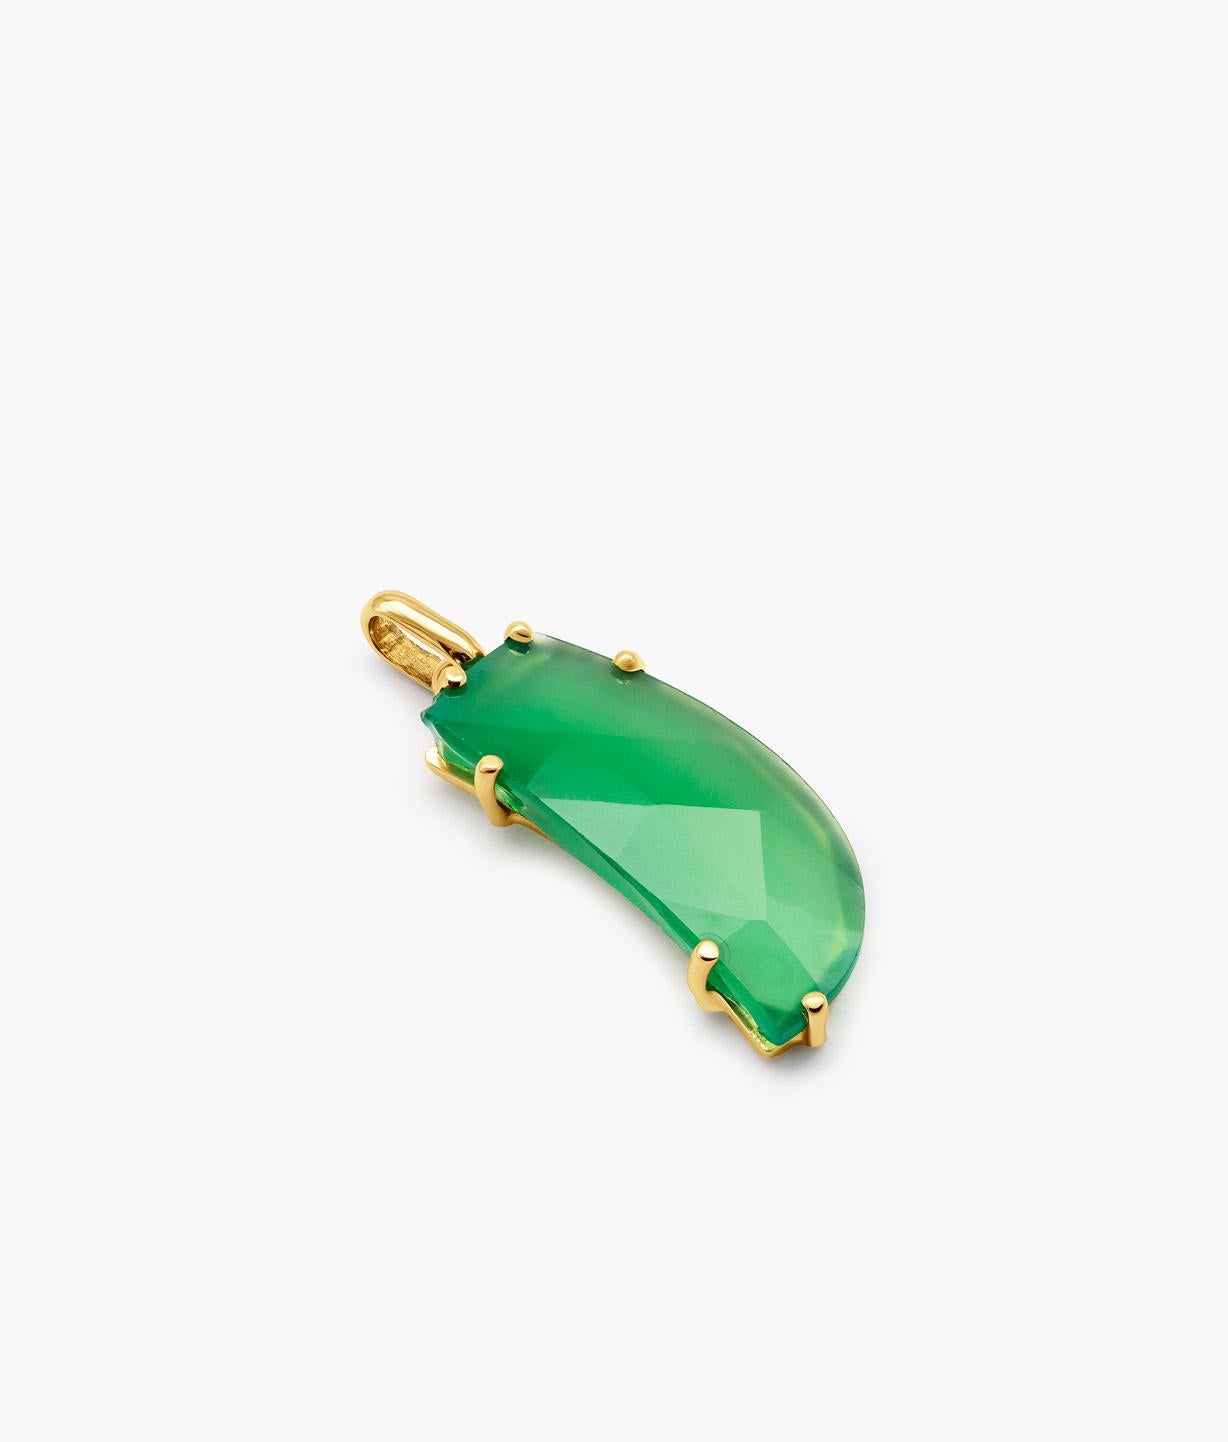 One-of-a-kind green agate charm. Hand-made assembled on a 14-karat gold frame and recovered from our broken gems archives.

This pendant celebrates the beauty in imperfection.

Gemstones: Green Agate / Dimensions: 23 x 10,6 mm / SUOT 585 engraving.